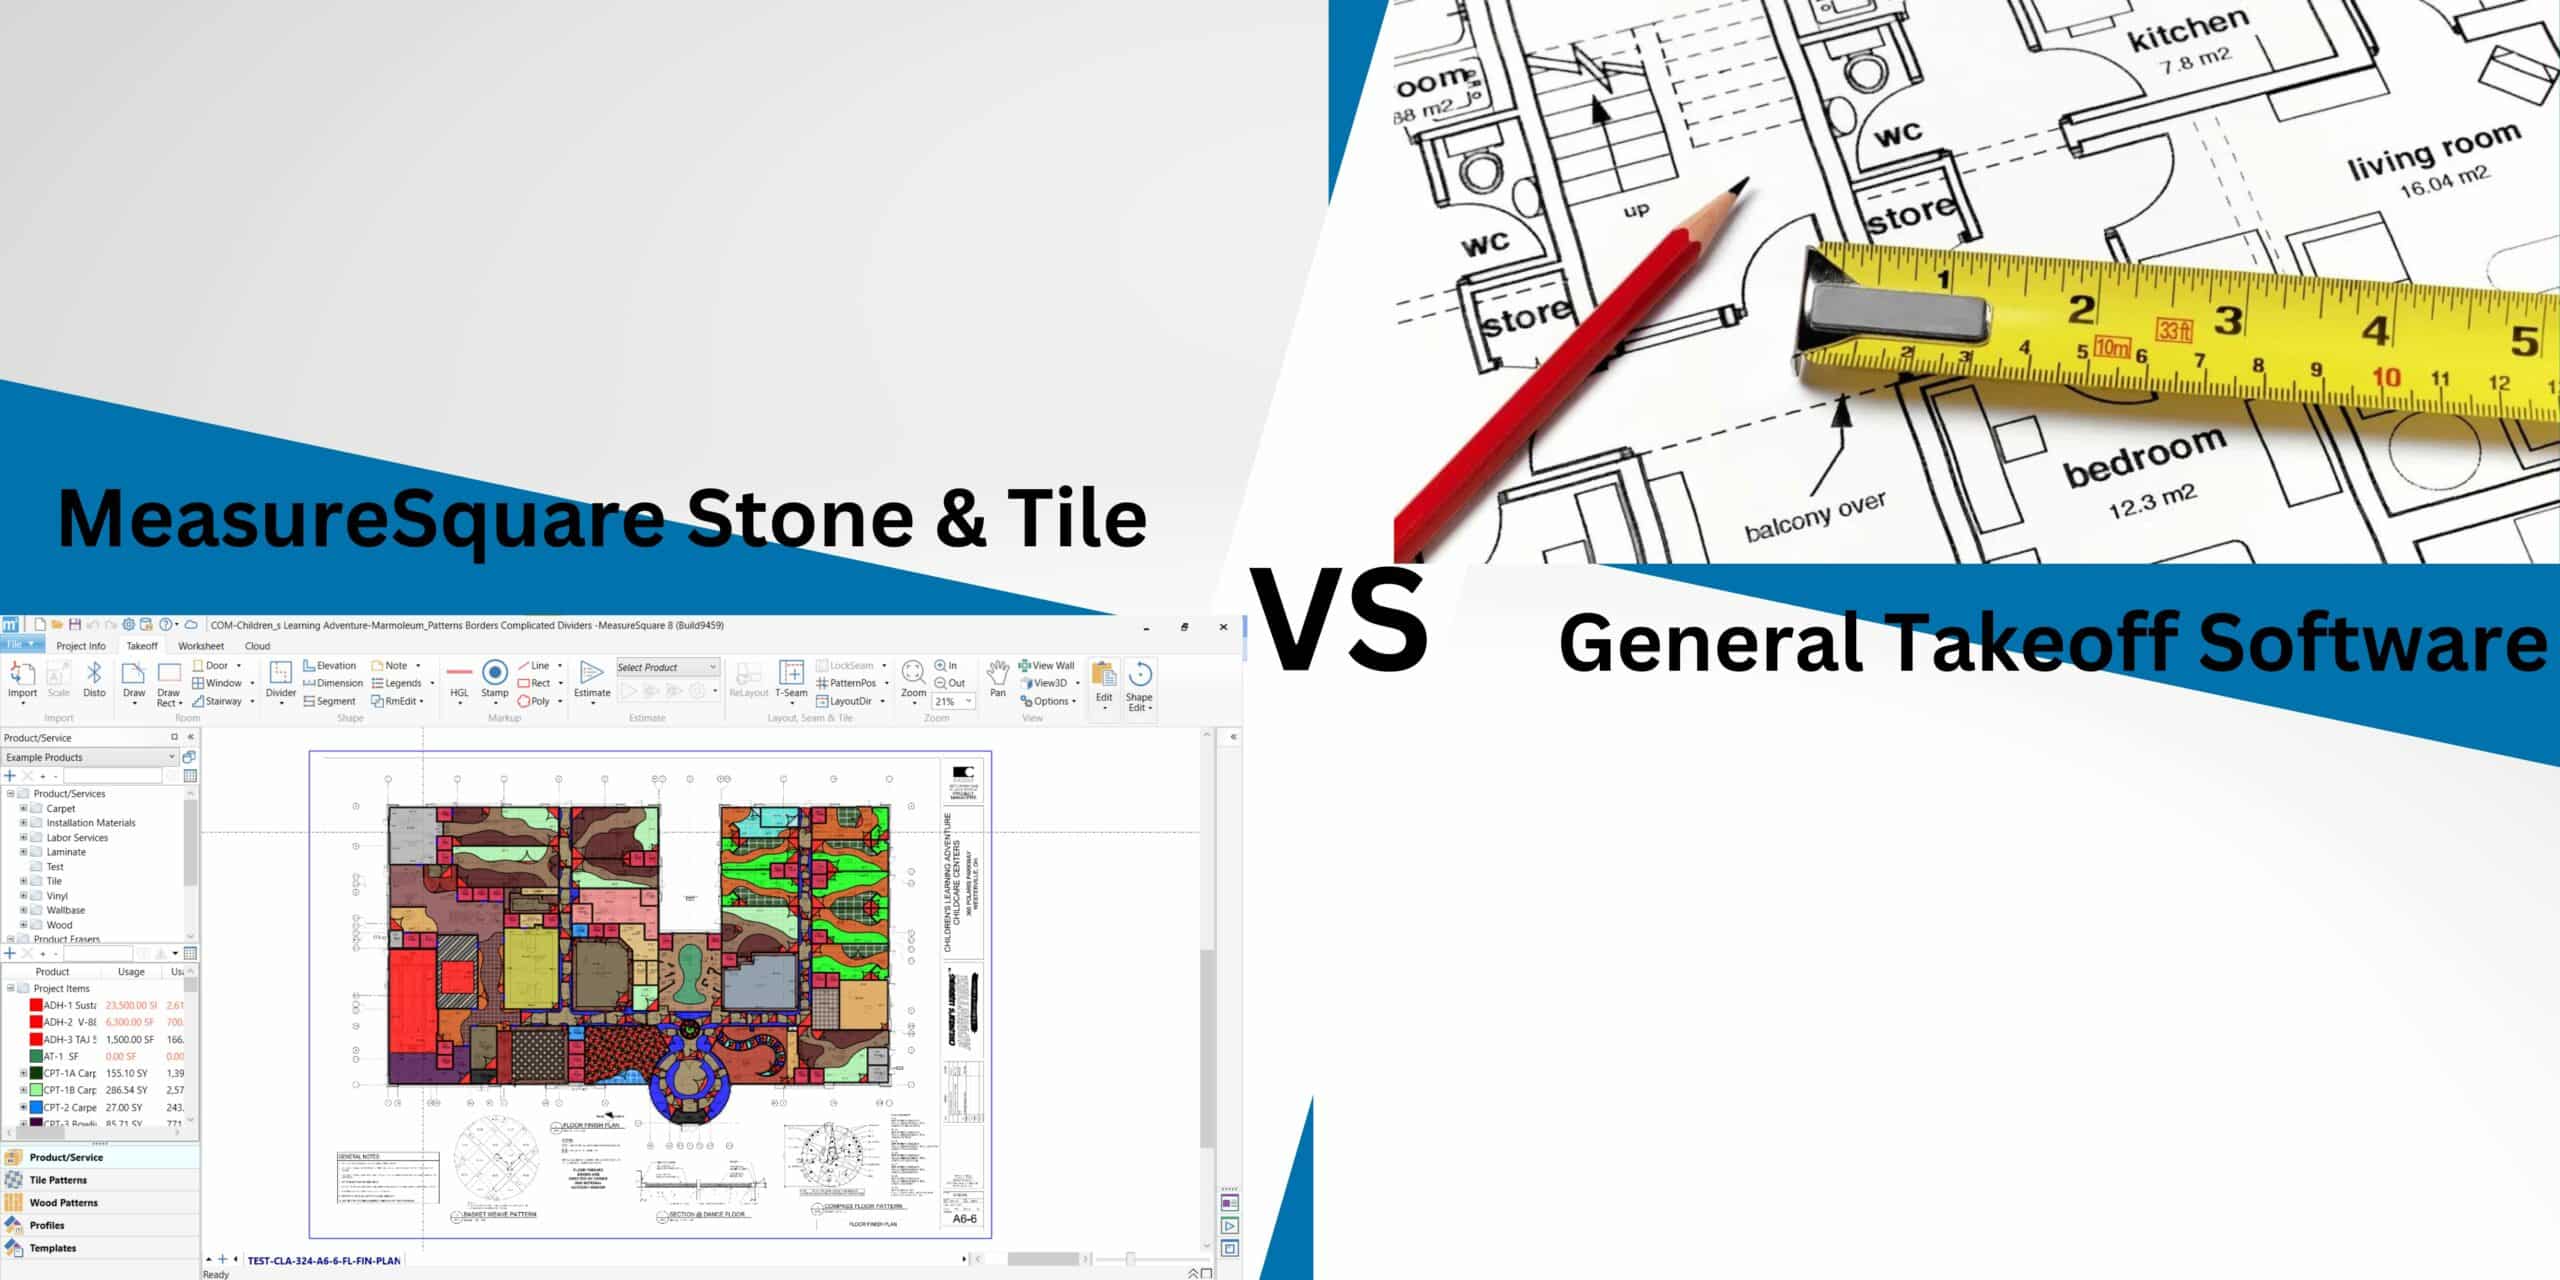 Let’s Compare MeasureSquare Stone & Tile vs. General Takeoff Software on the Market